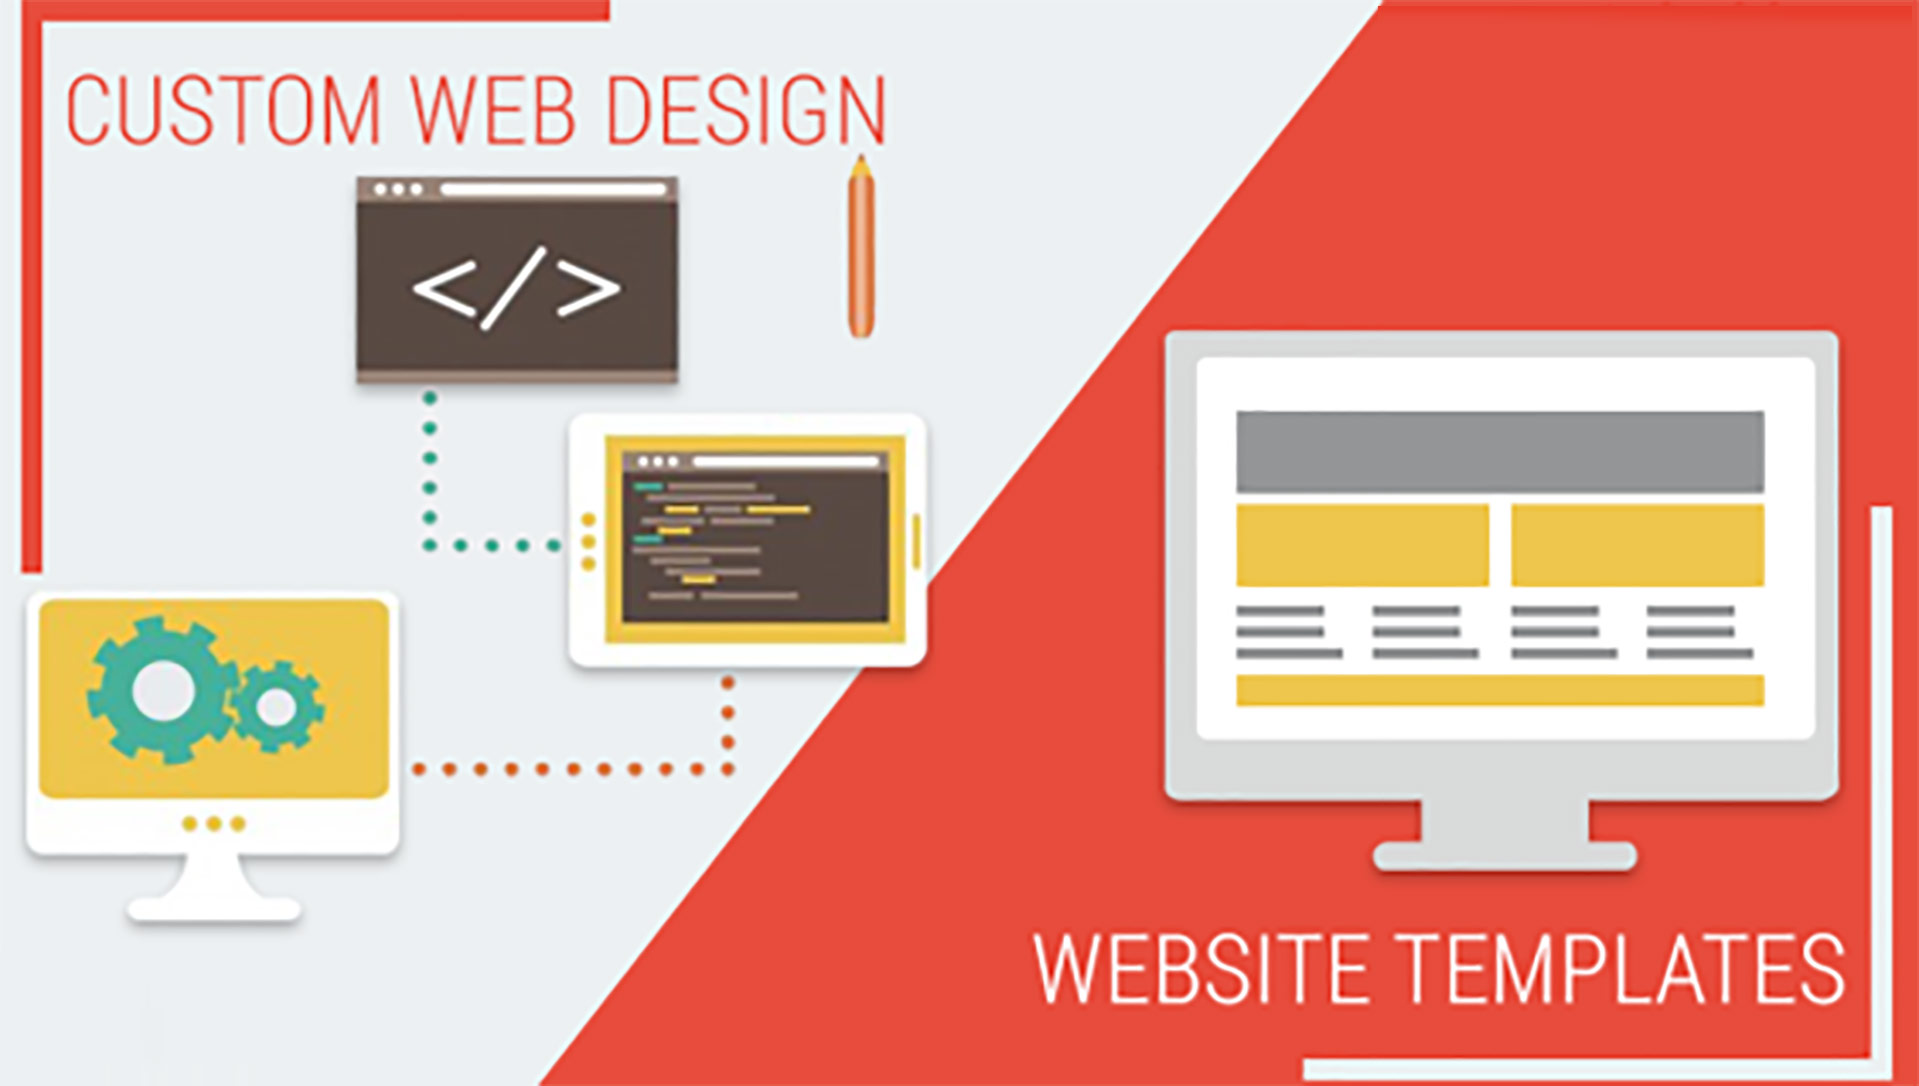 A Guide for startup: What Design to Choose - Customized or Web Template?